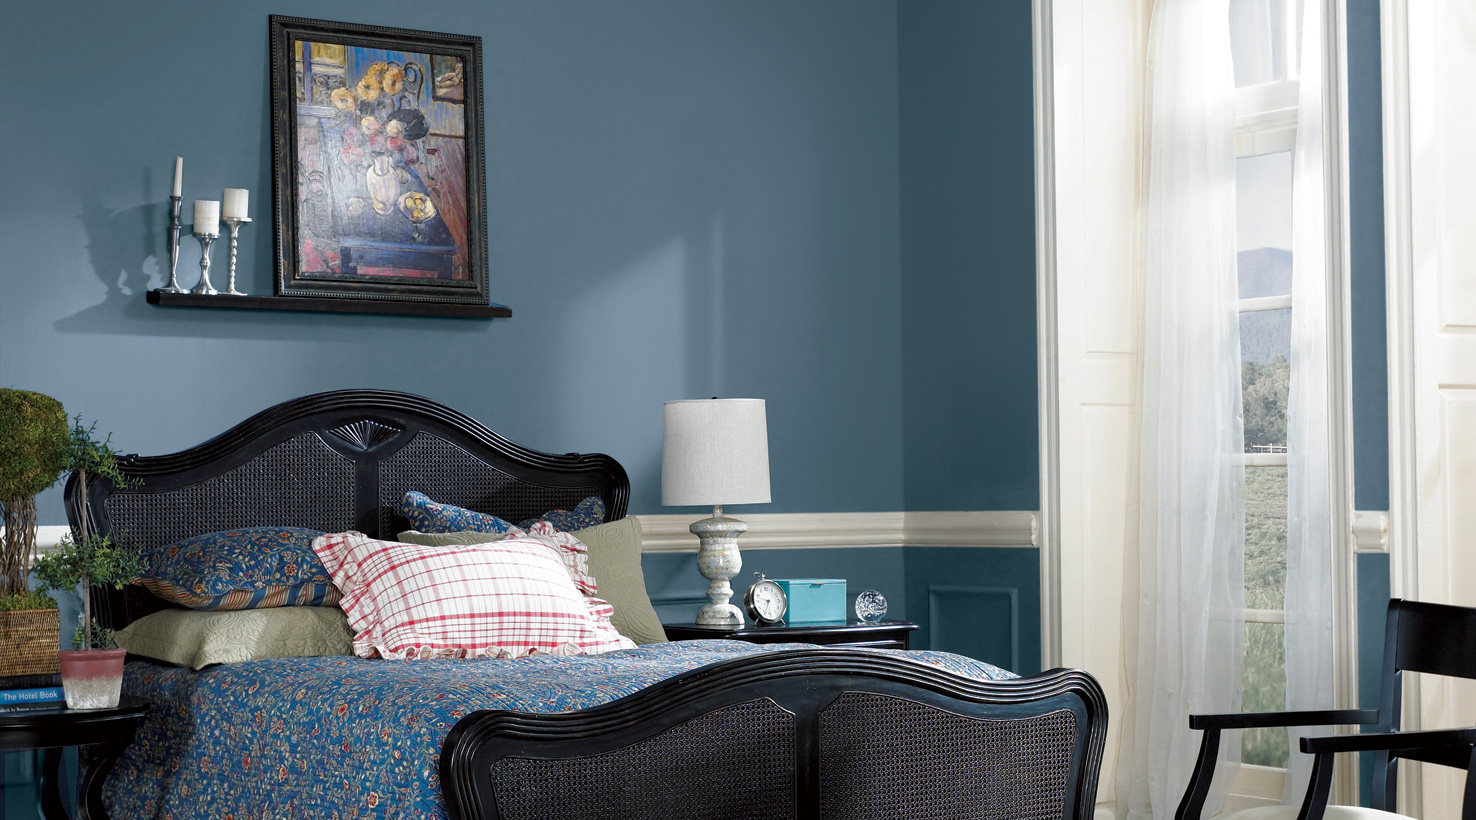 Bedroom Paint Color Ideas Inspiration Gallery Sherwin Williams pertaining to size 1476 X 820